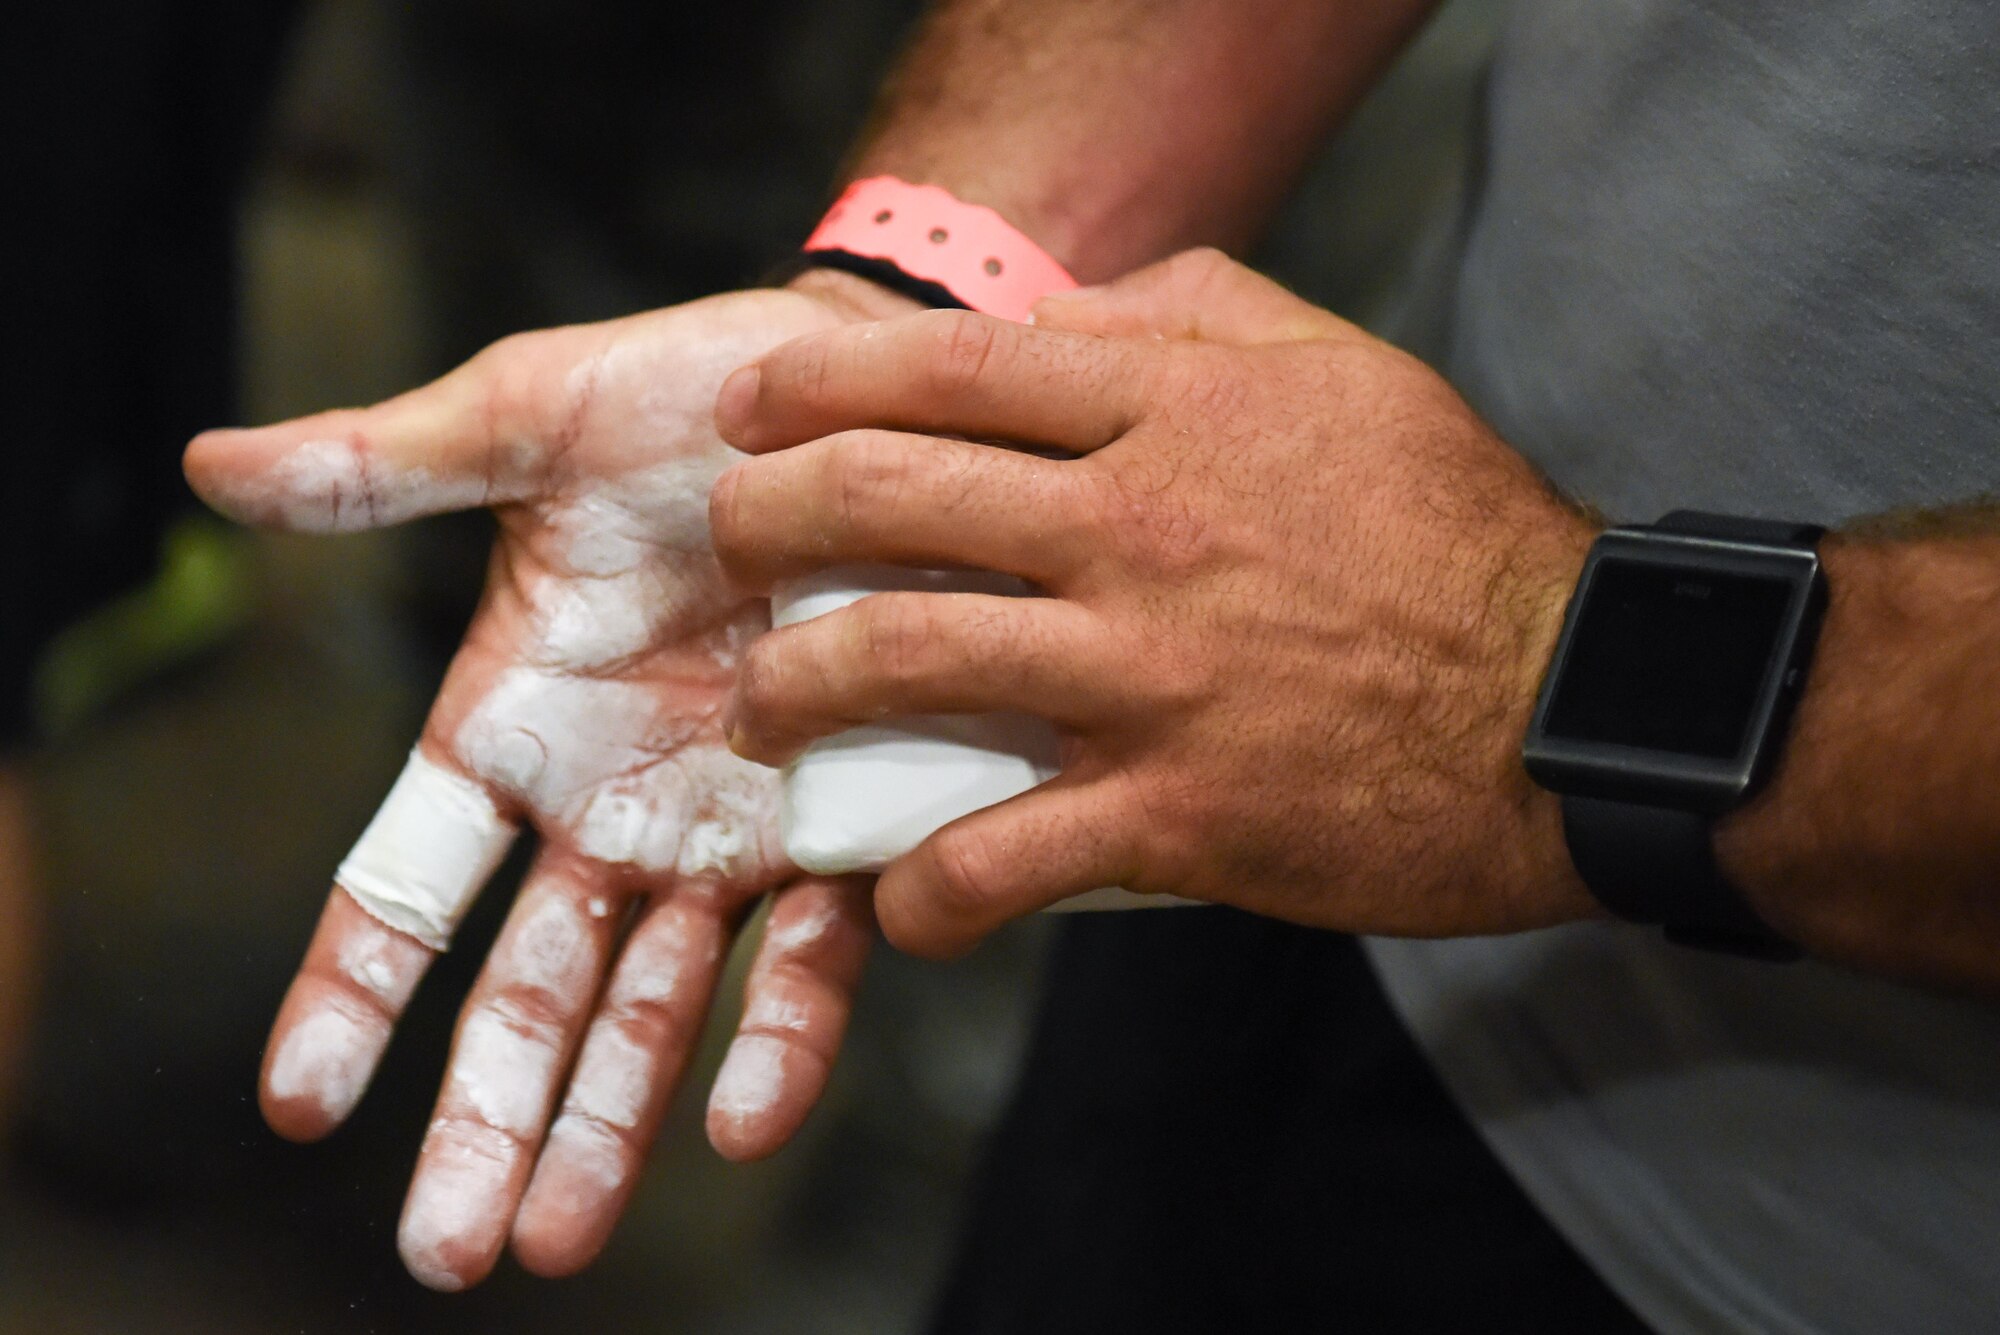 A member of Team Barksdale applies chalk to his hands before he attempts the Alpha Warrior course at Barksdale Air Force Base, La., July 11, 2017. The objective is to complete each obstacle on the course and finish with a 100 percent completion rate. (U.S. Air Force photo/Airman 1st Class Stuart Bright)